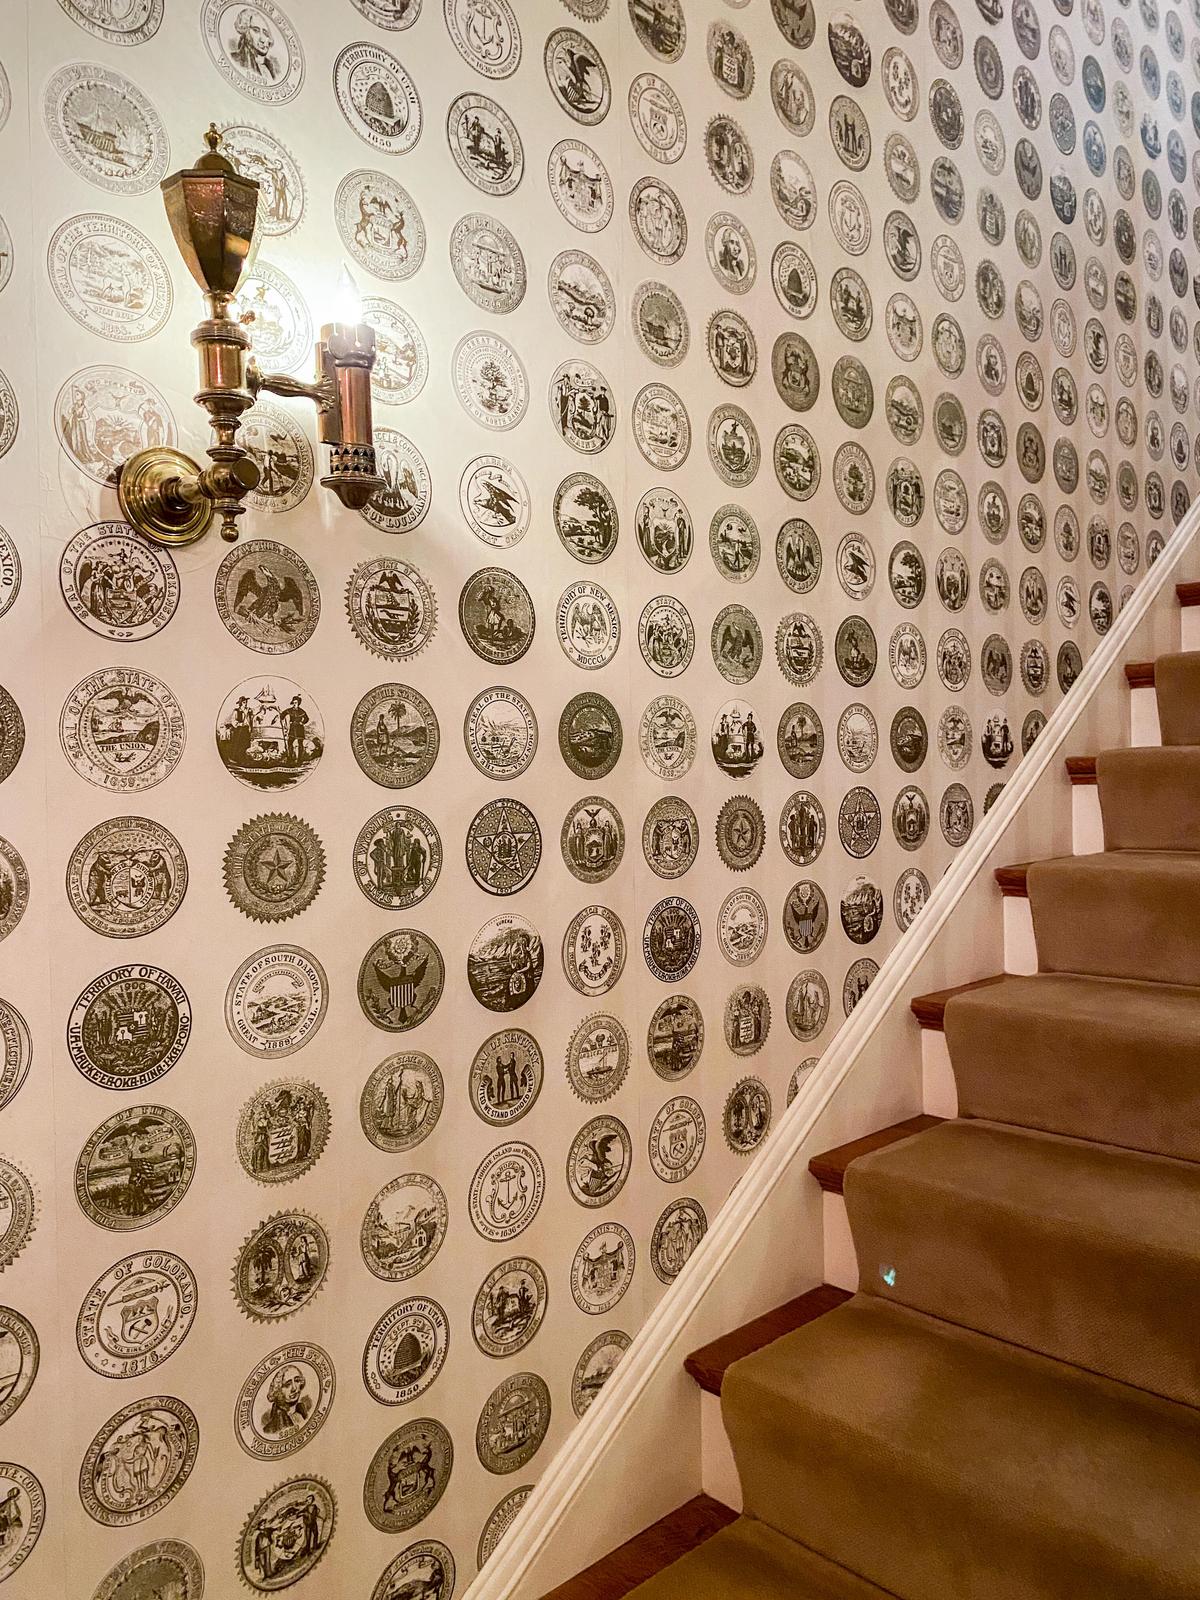 Eisenhower’s entry hall greets visitors with this eye-catching specially made wallpaper<br/>showcasing state seals, as well as the nation’s seal. (Lynn Topel)